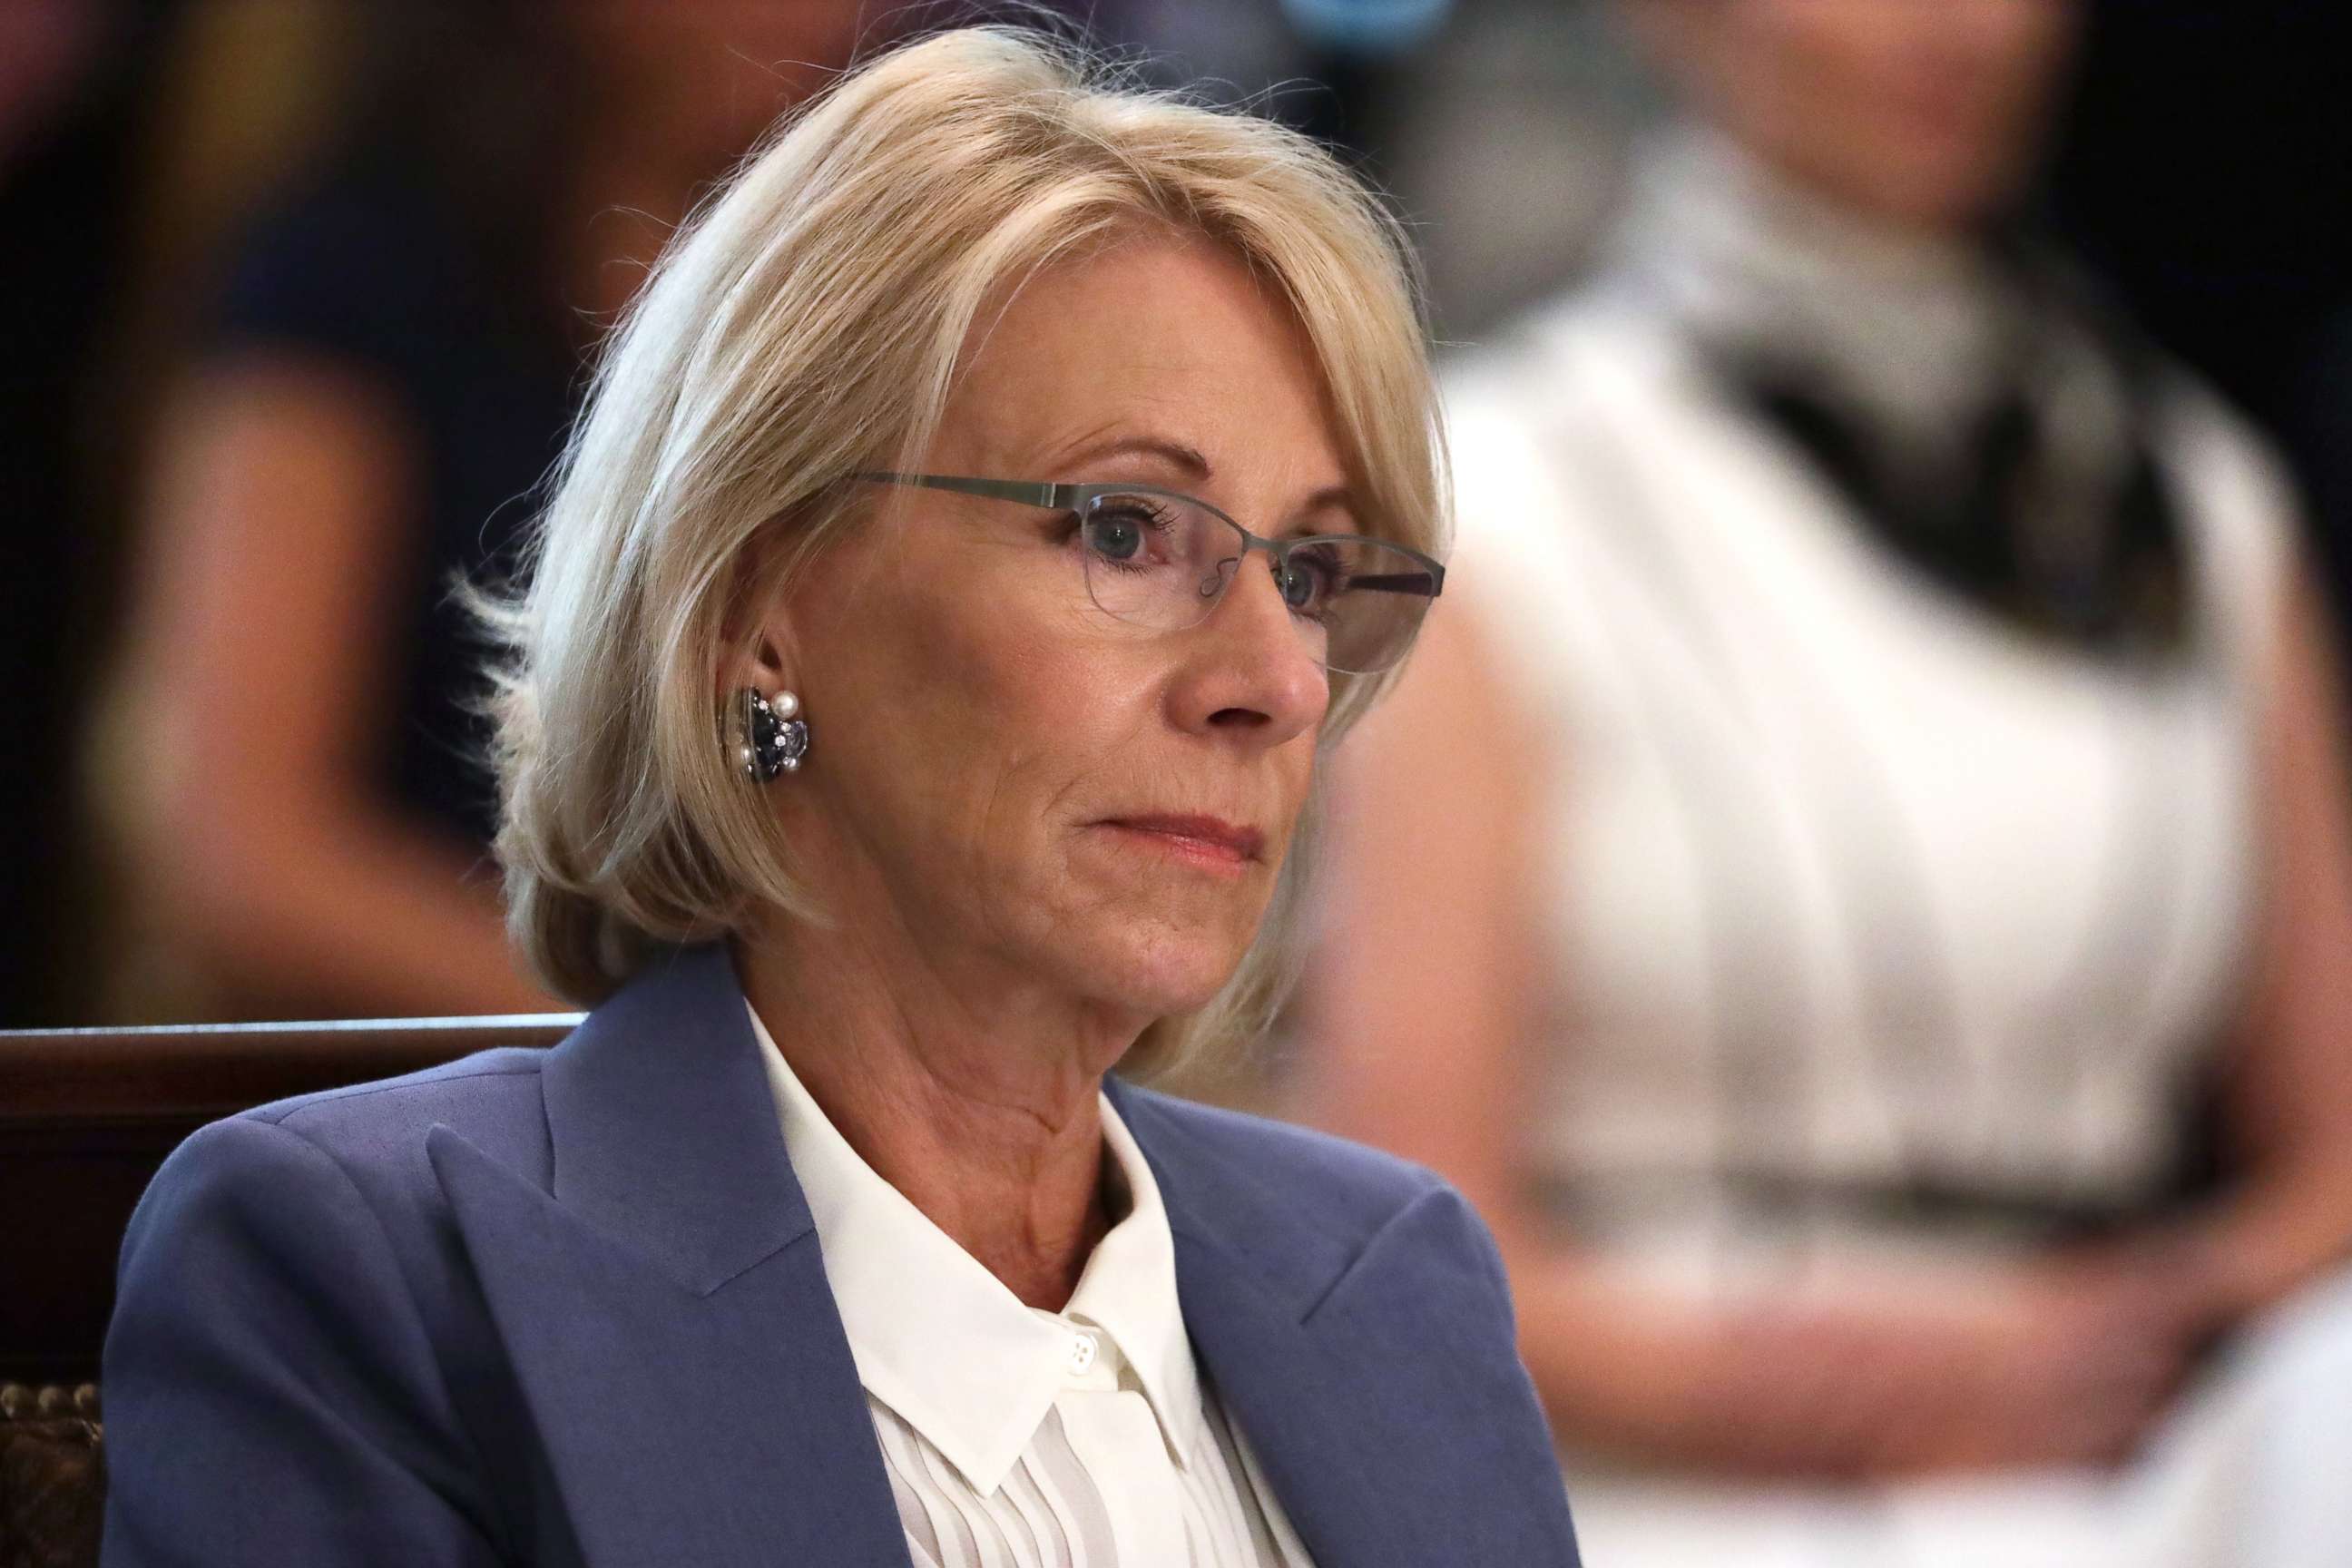 PHOTO: Secretary of Education Betsy DeVos listens during a cabinet meeting in the East Room of the White House, May 19, 2020.